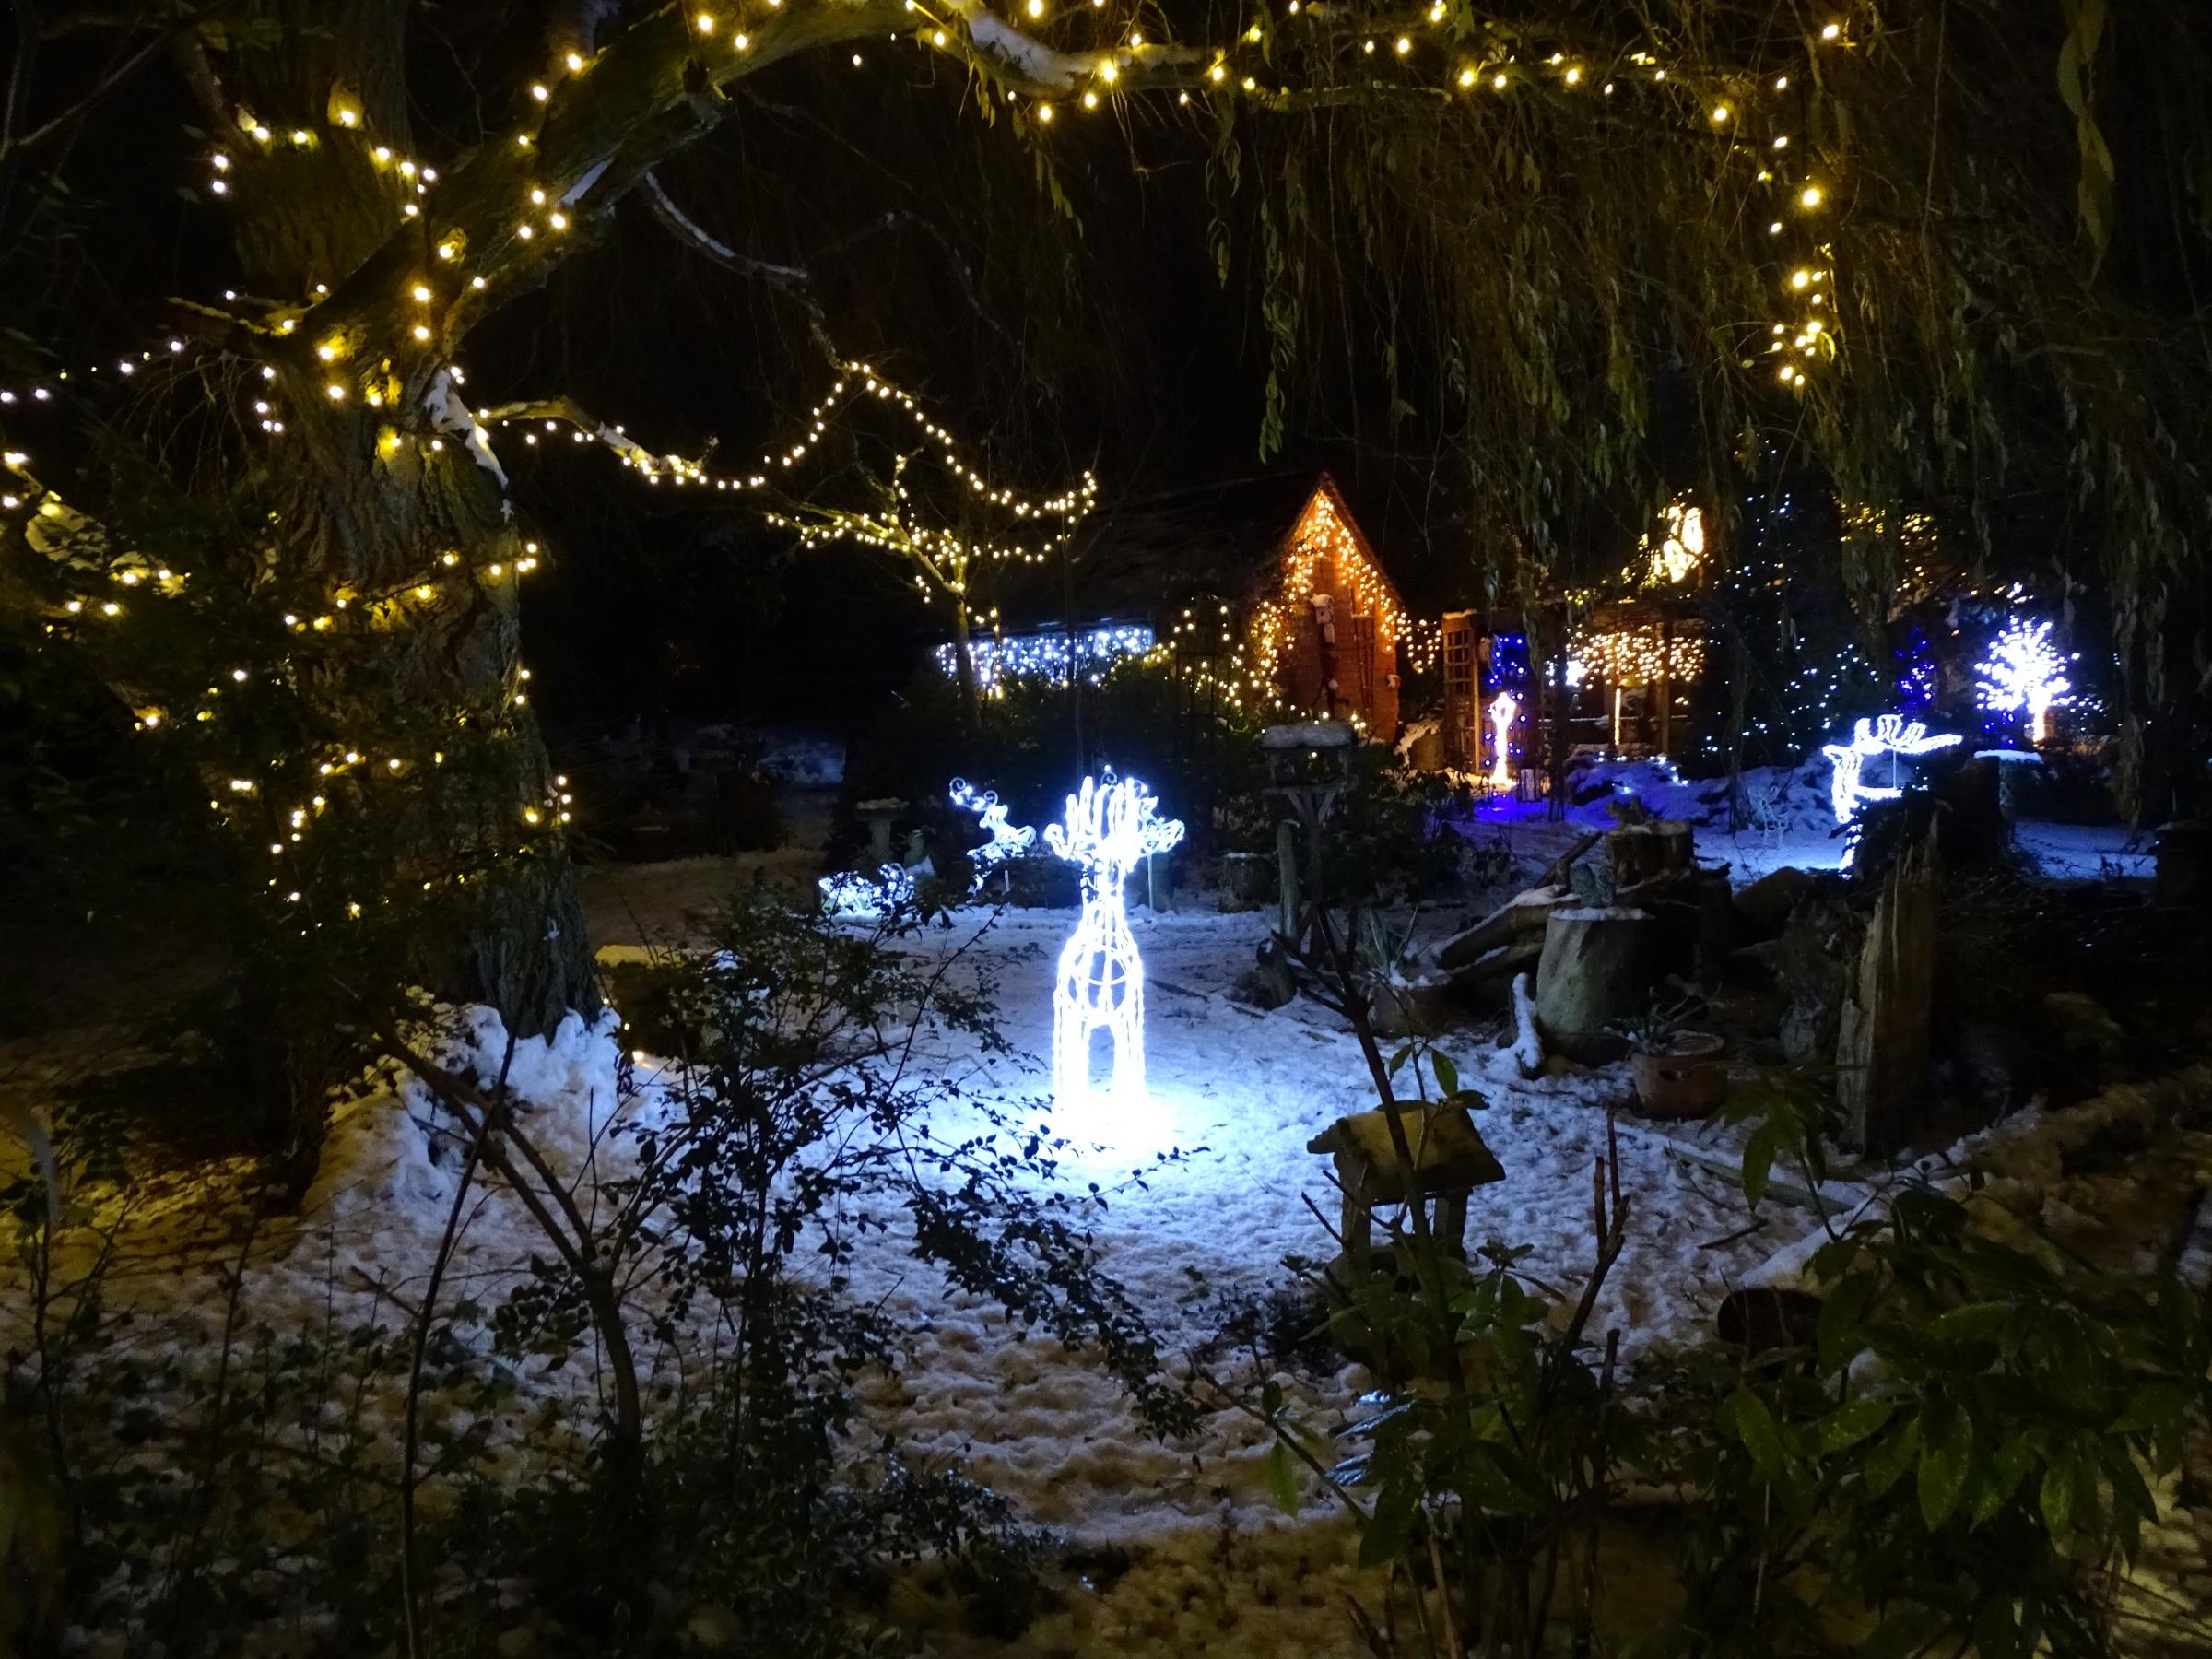 Some individual houses illuminate their gardens with festive colours and flood the lanes with light